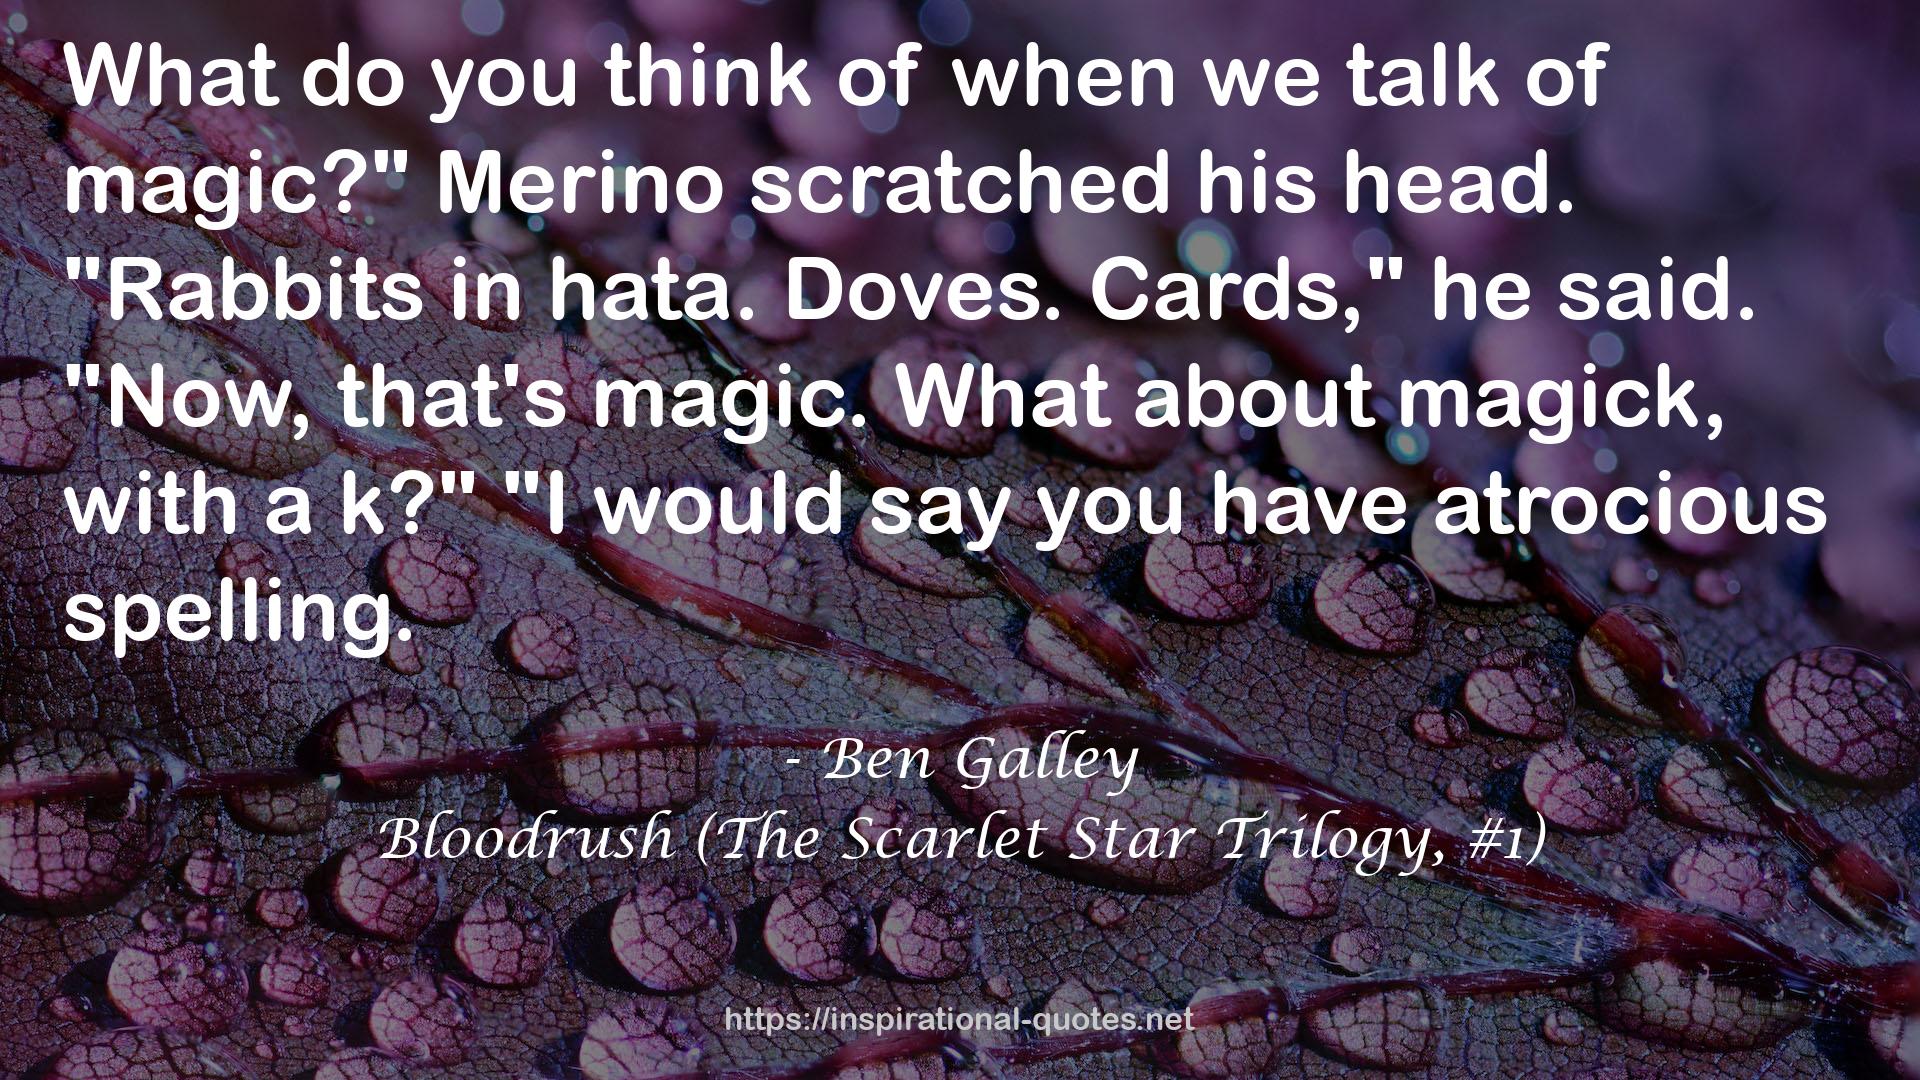 Bloodrush (The Scarlet Star Trilogy, #1) QUOTES